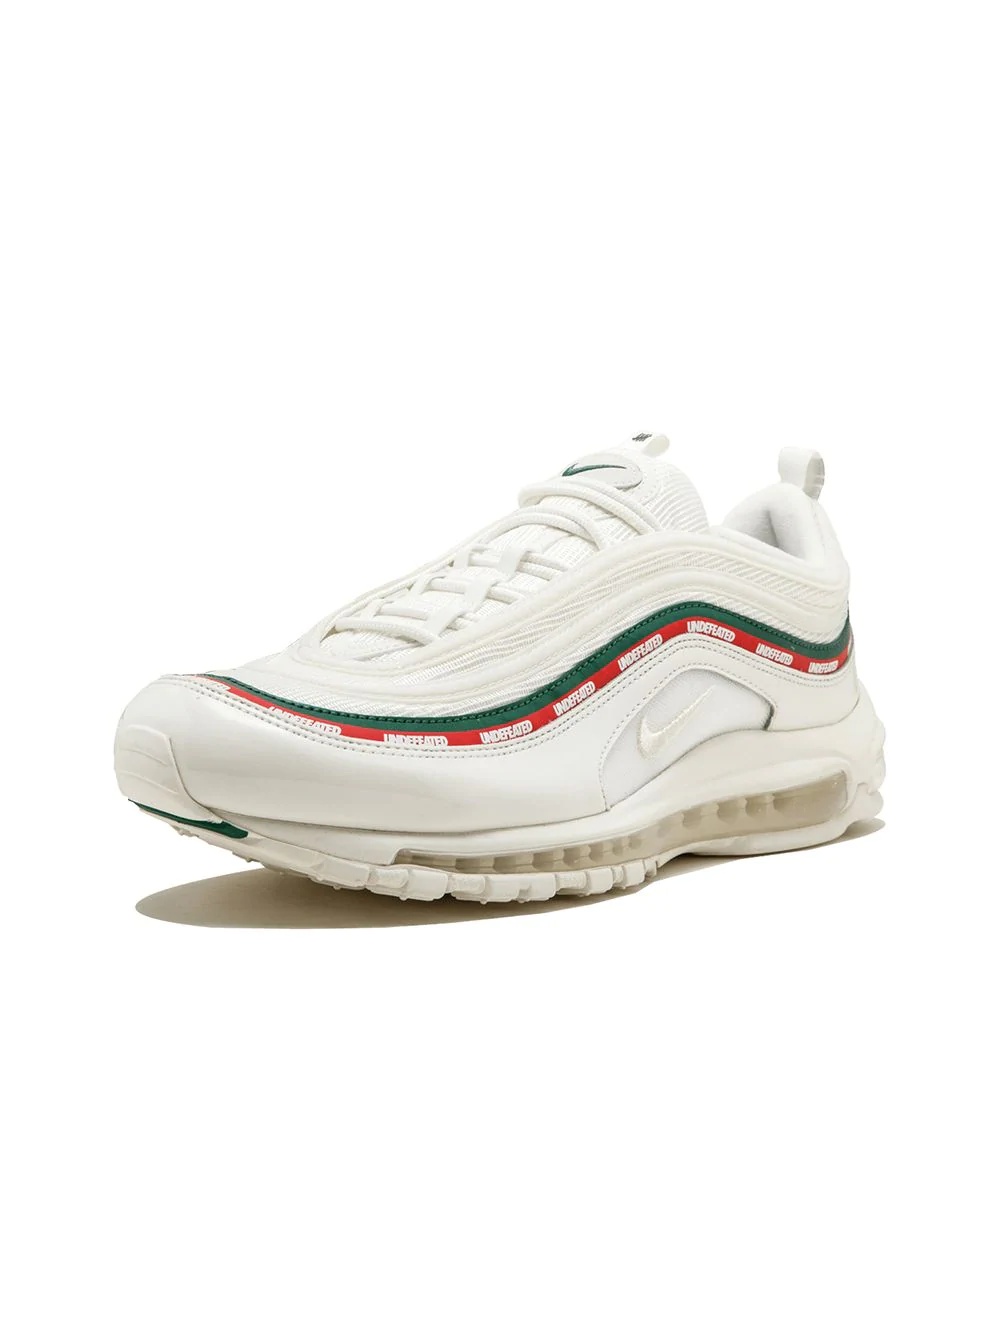 x Undefeated Air Max 97 OG "White" sneakers - 4